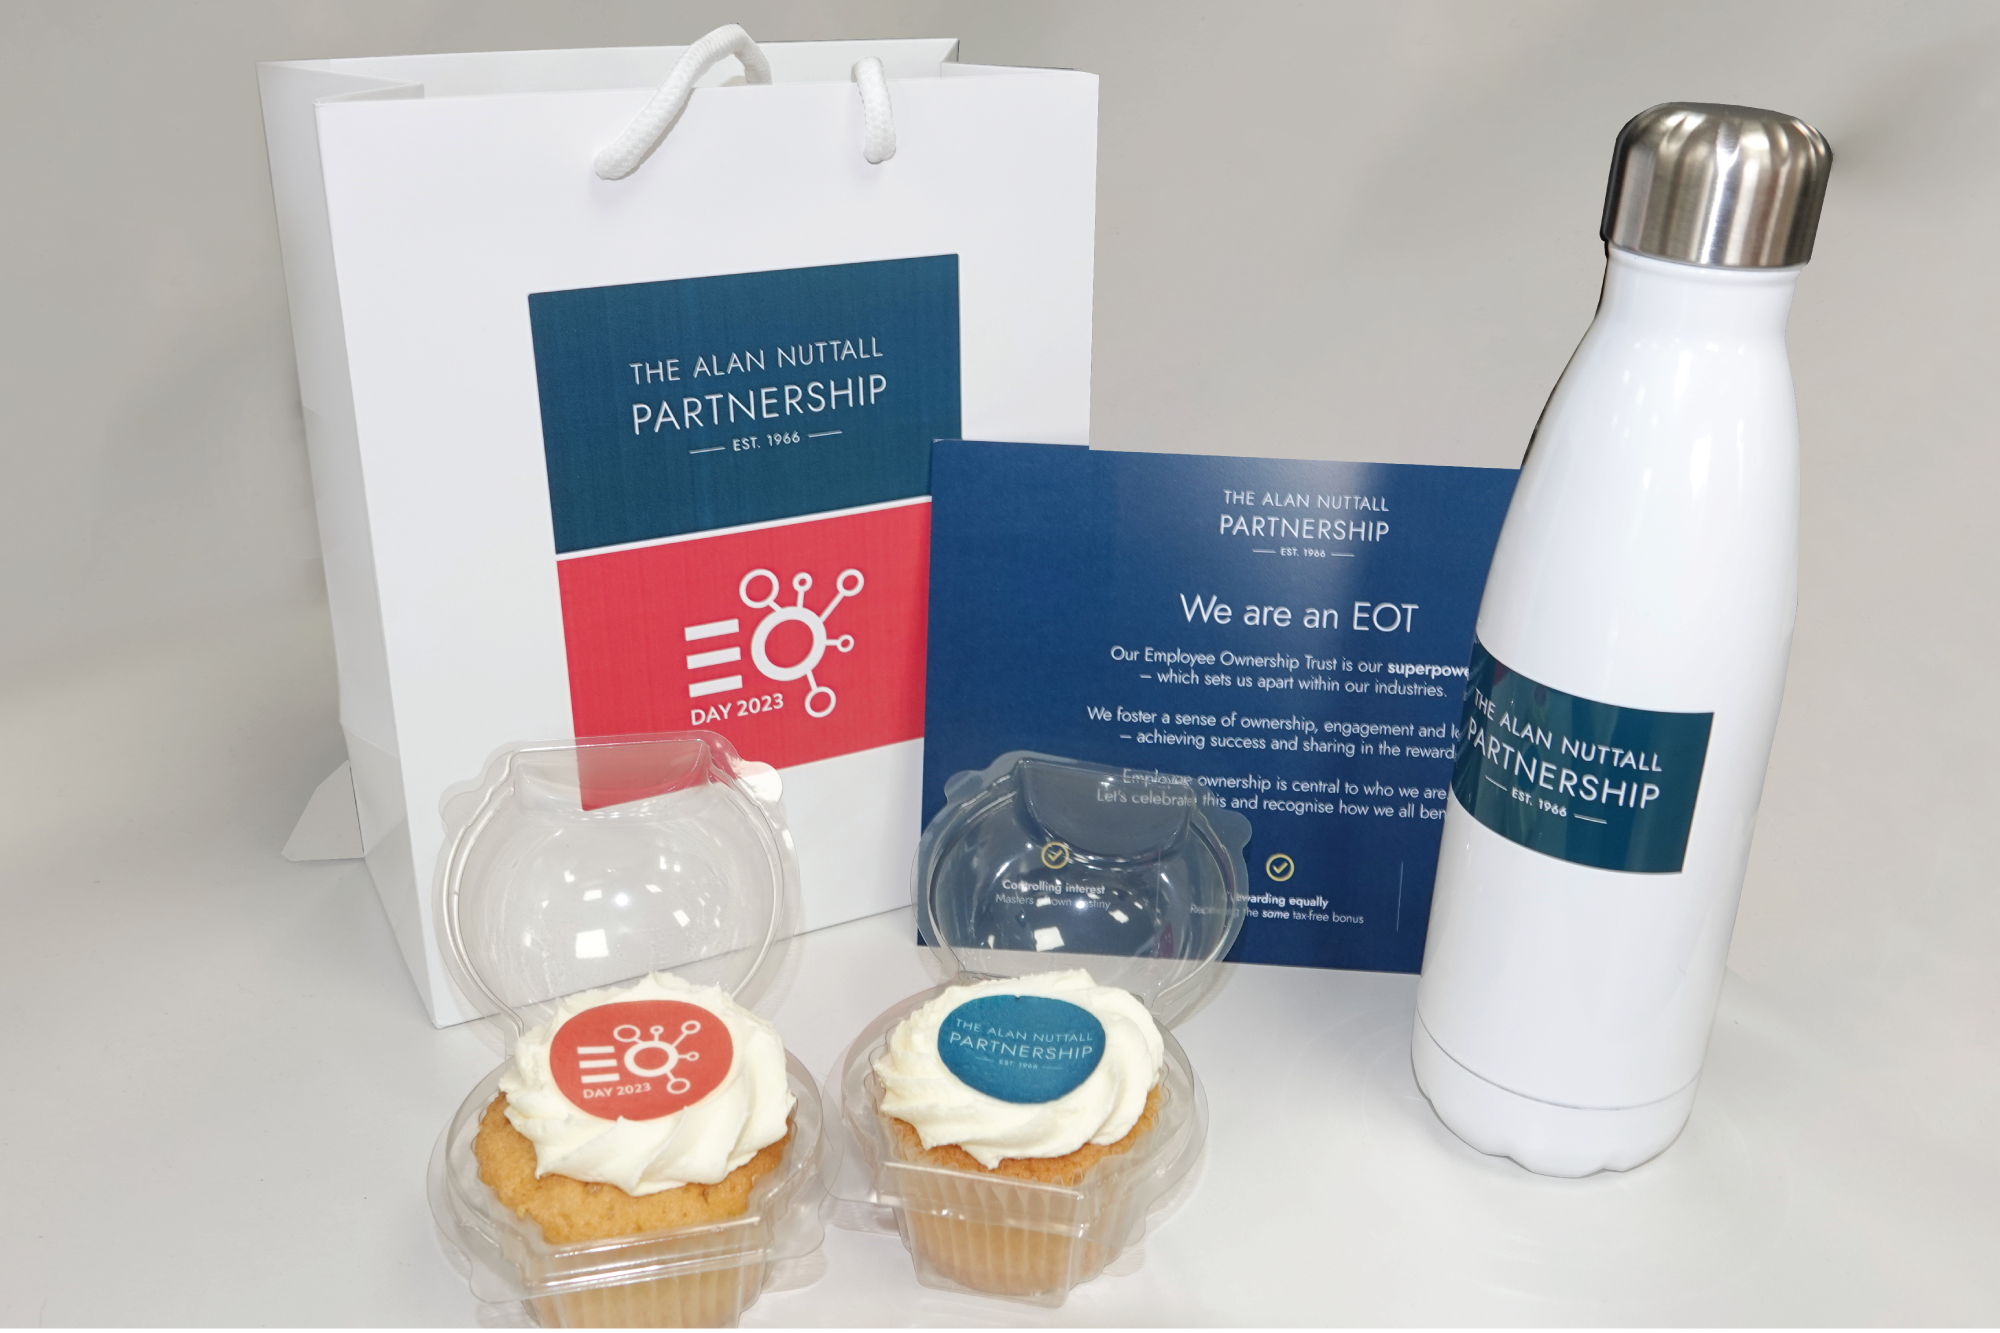 Contents of the goodie bag given to all Partners at The Alan Nuttall Partnership for EO Day 2023